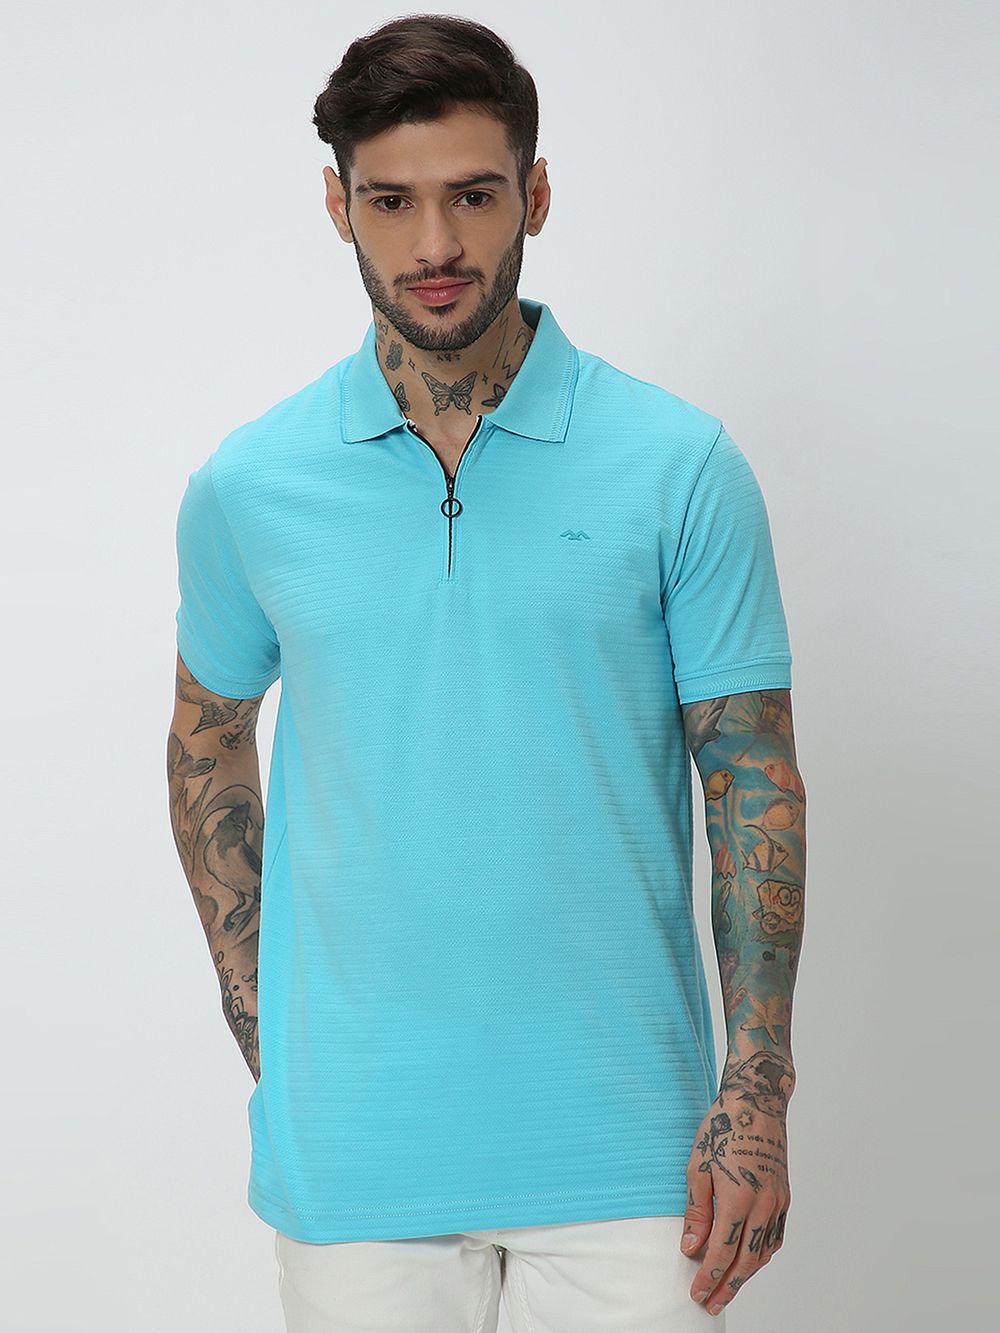 Turquoise Textured Solid Jersey Polo T-Shirt